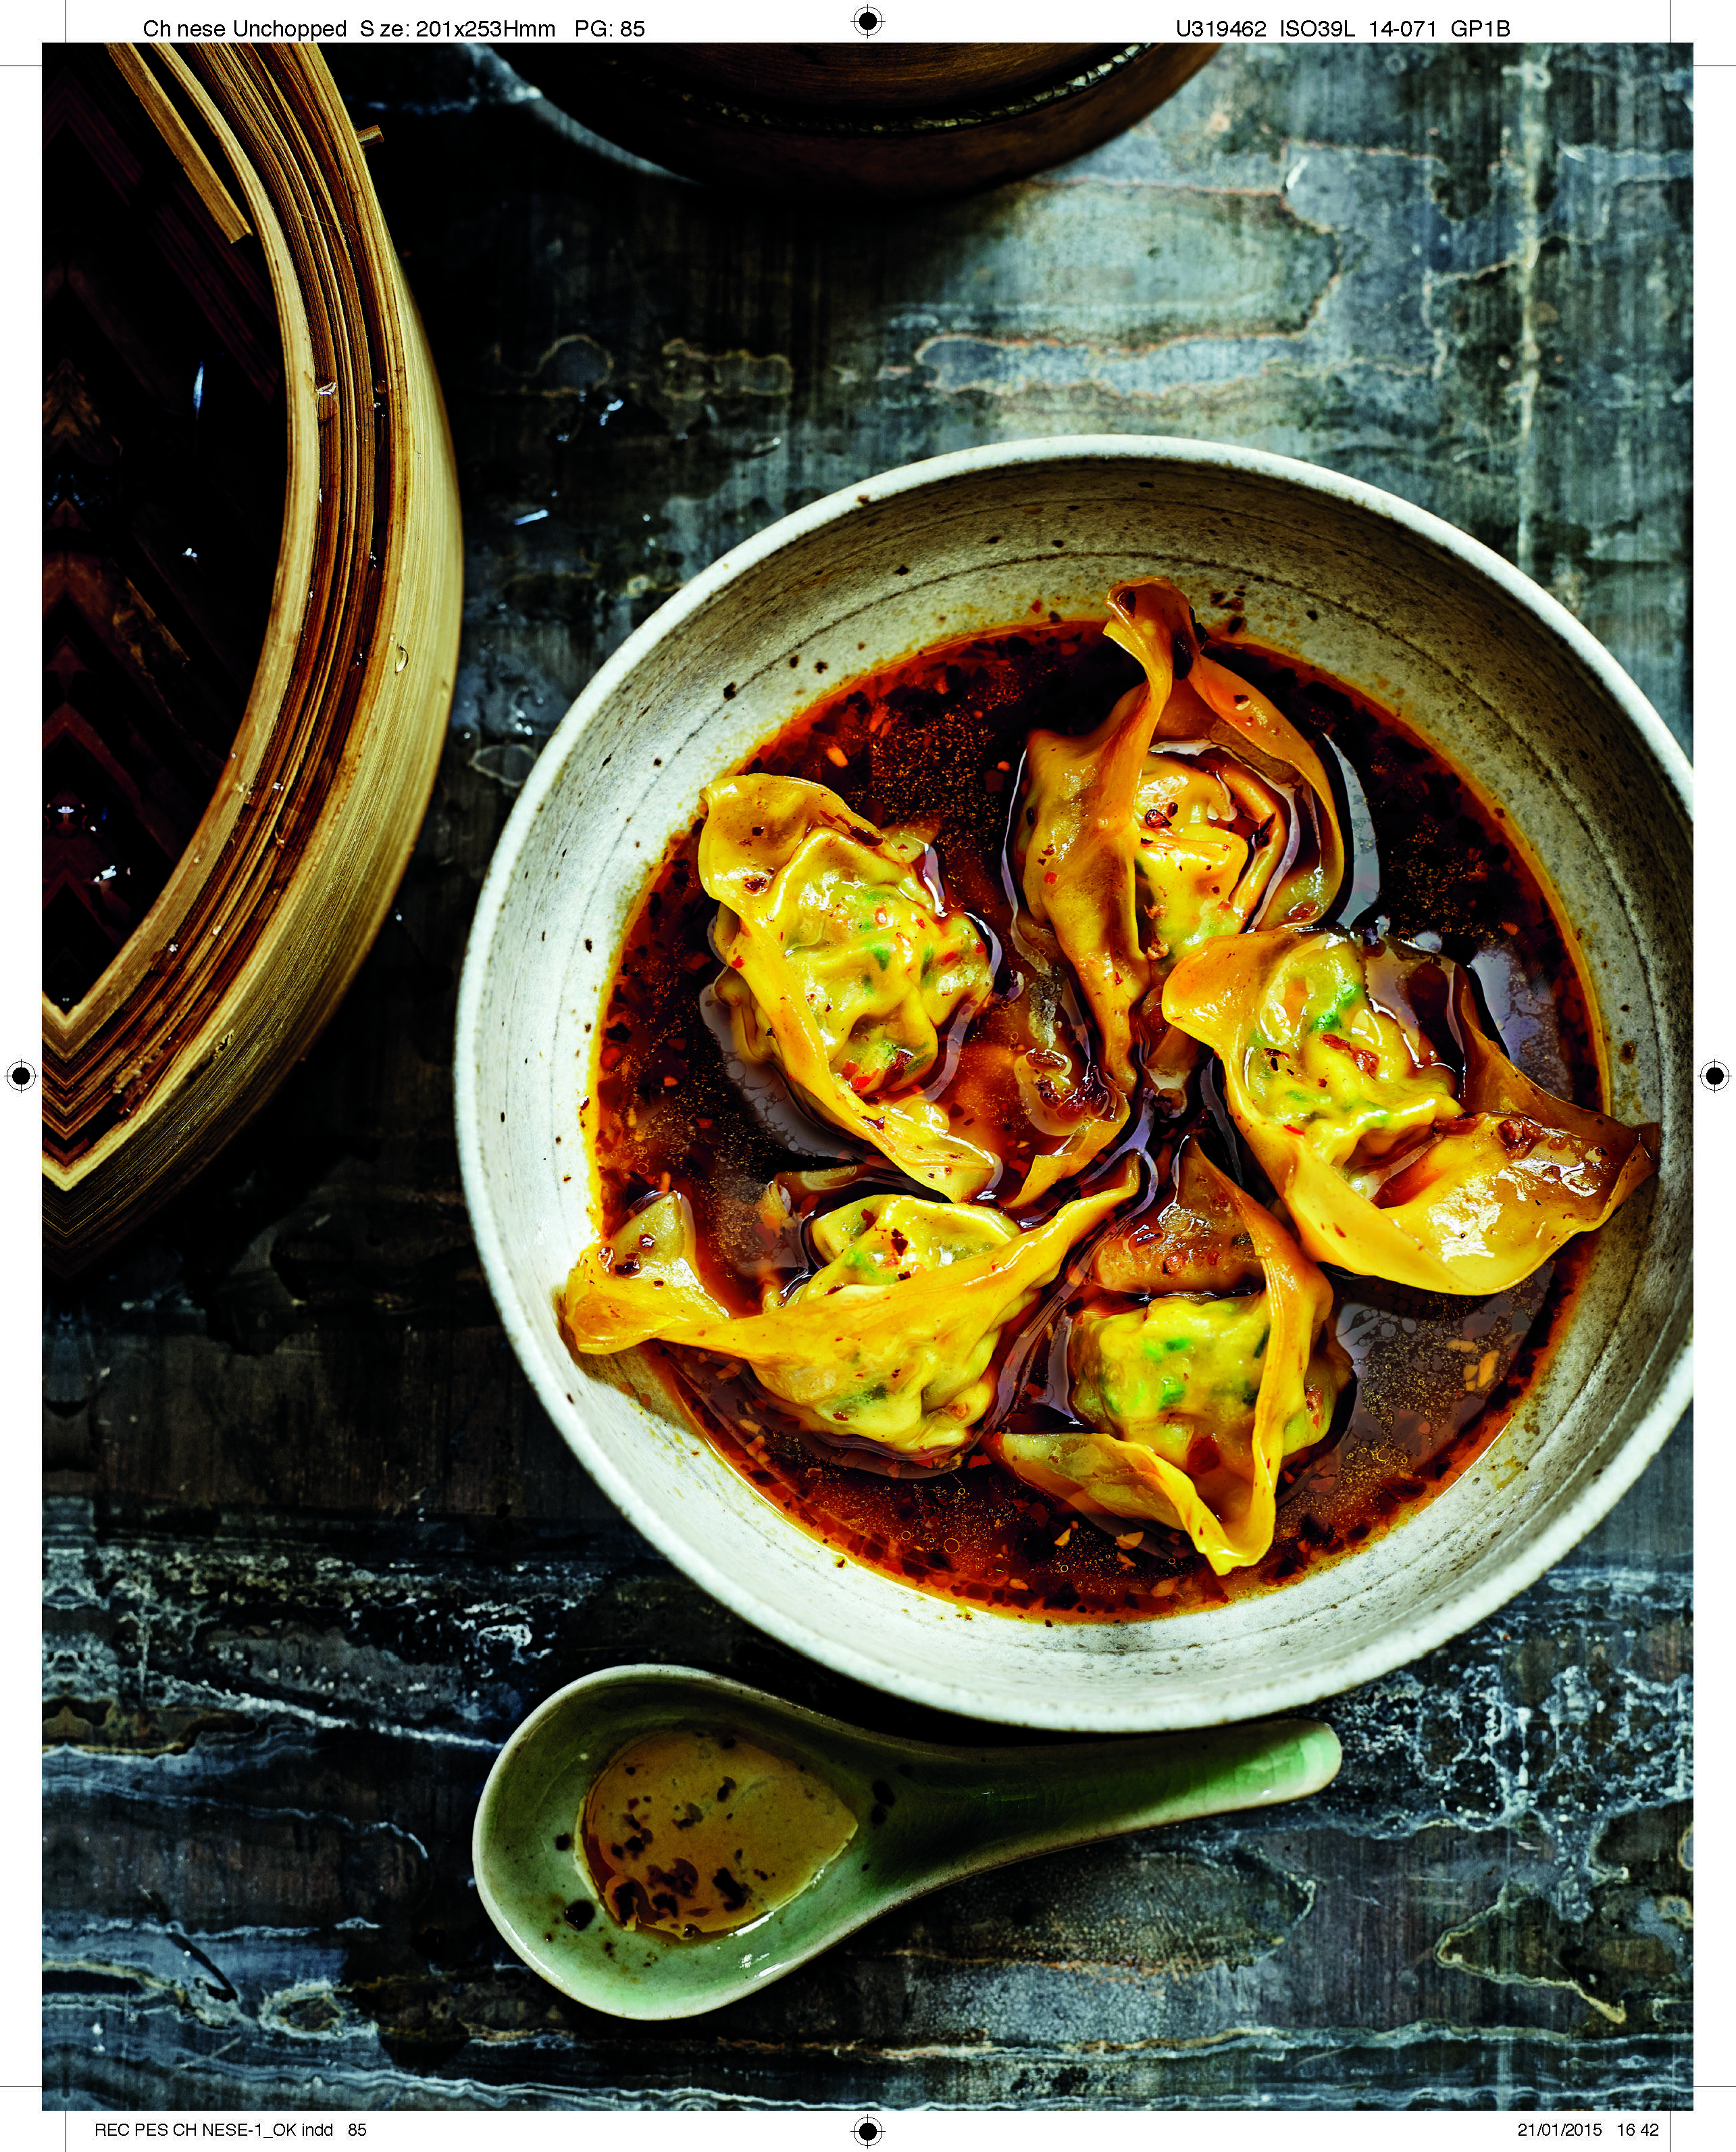 Steamed wontons in chilli broth recipe from Chinese Unchopped by ...